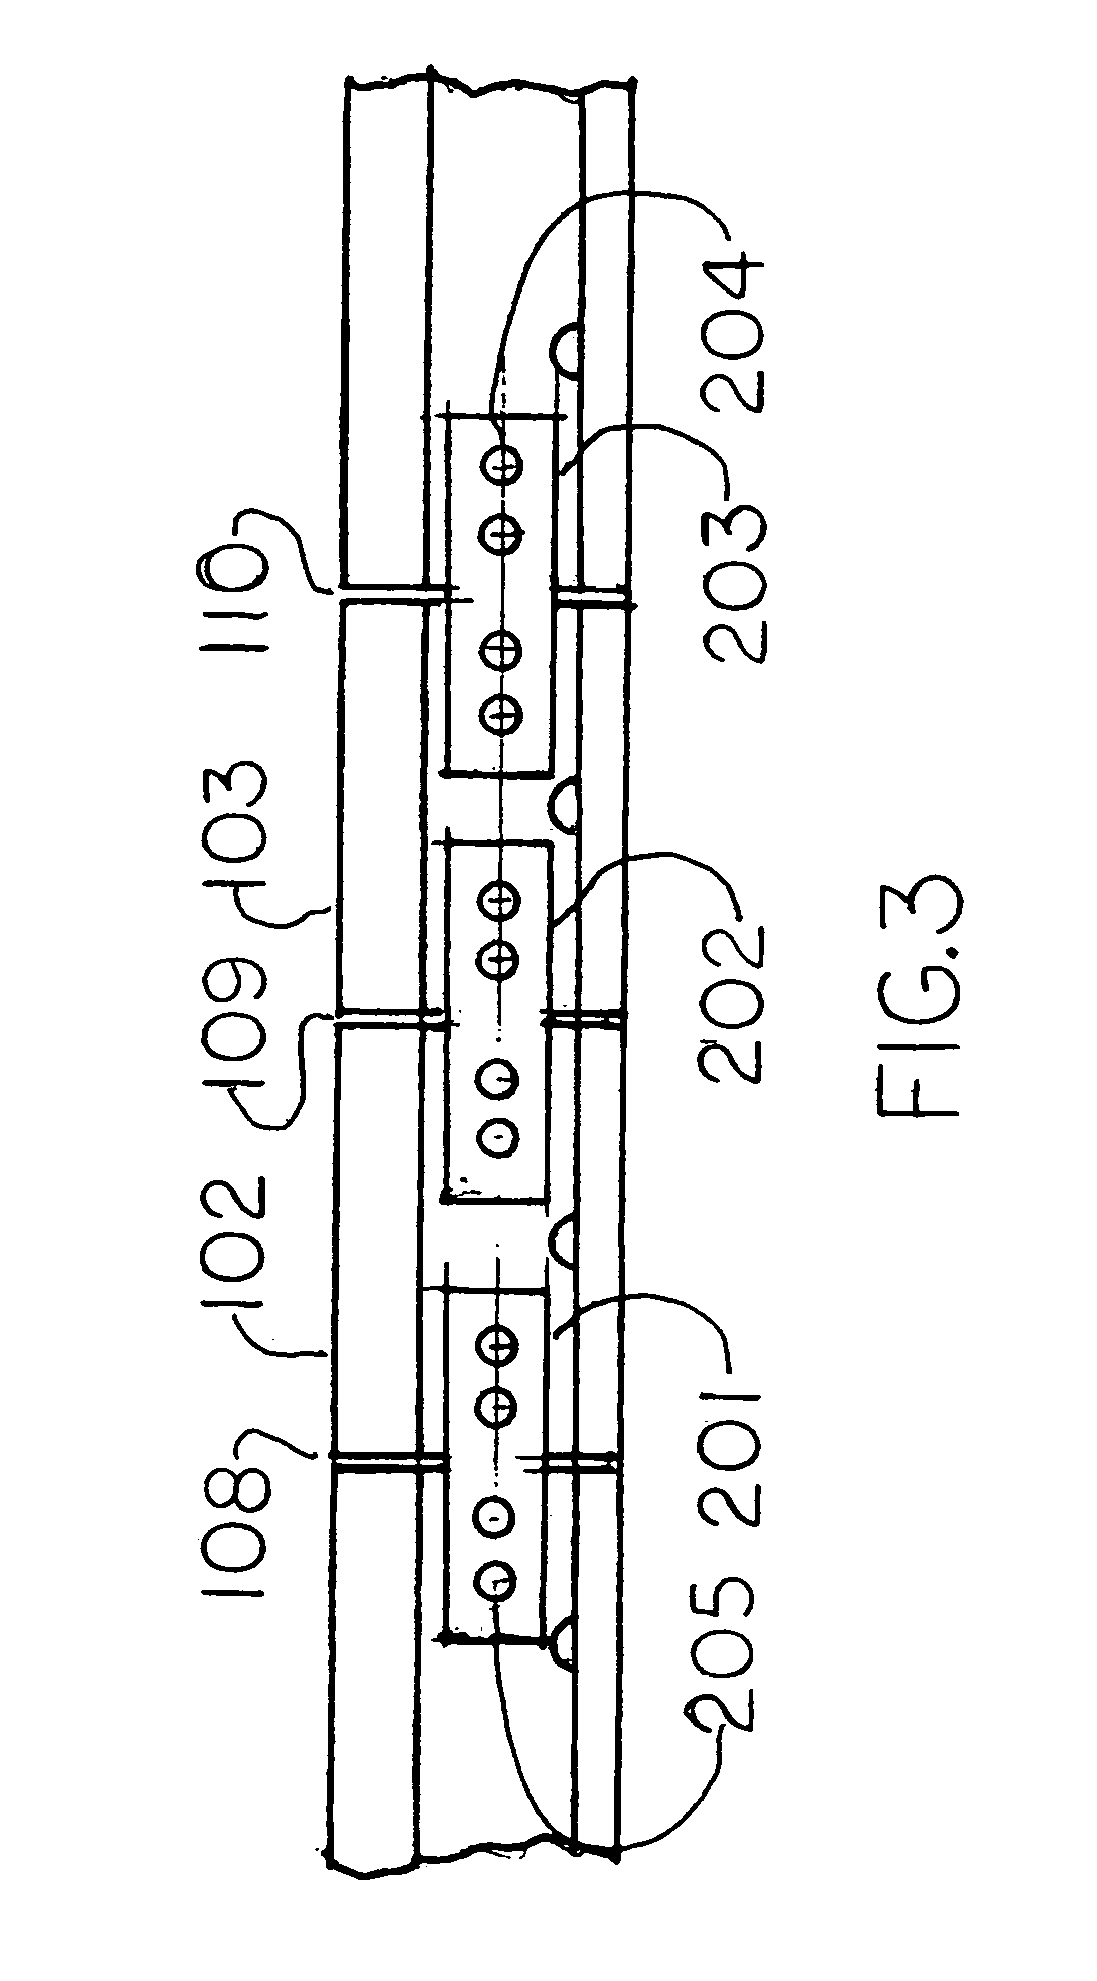 System for detection of defects in railroad car wheels